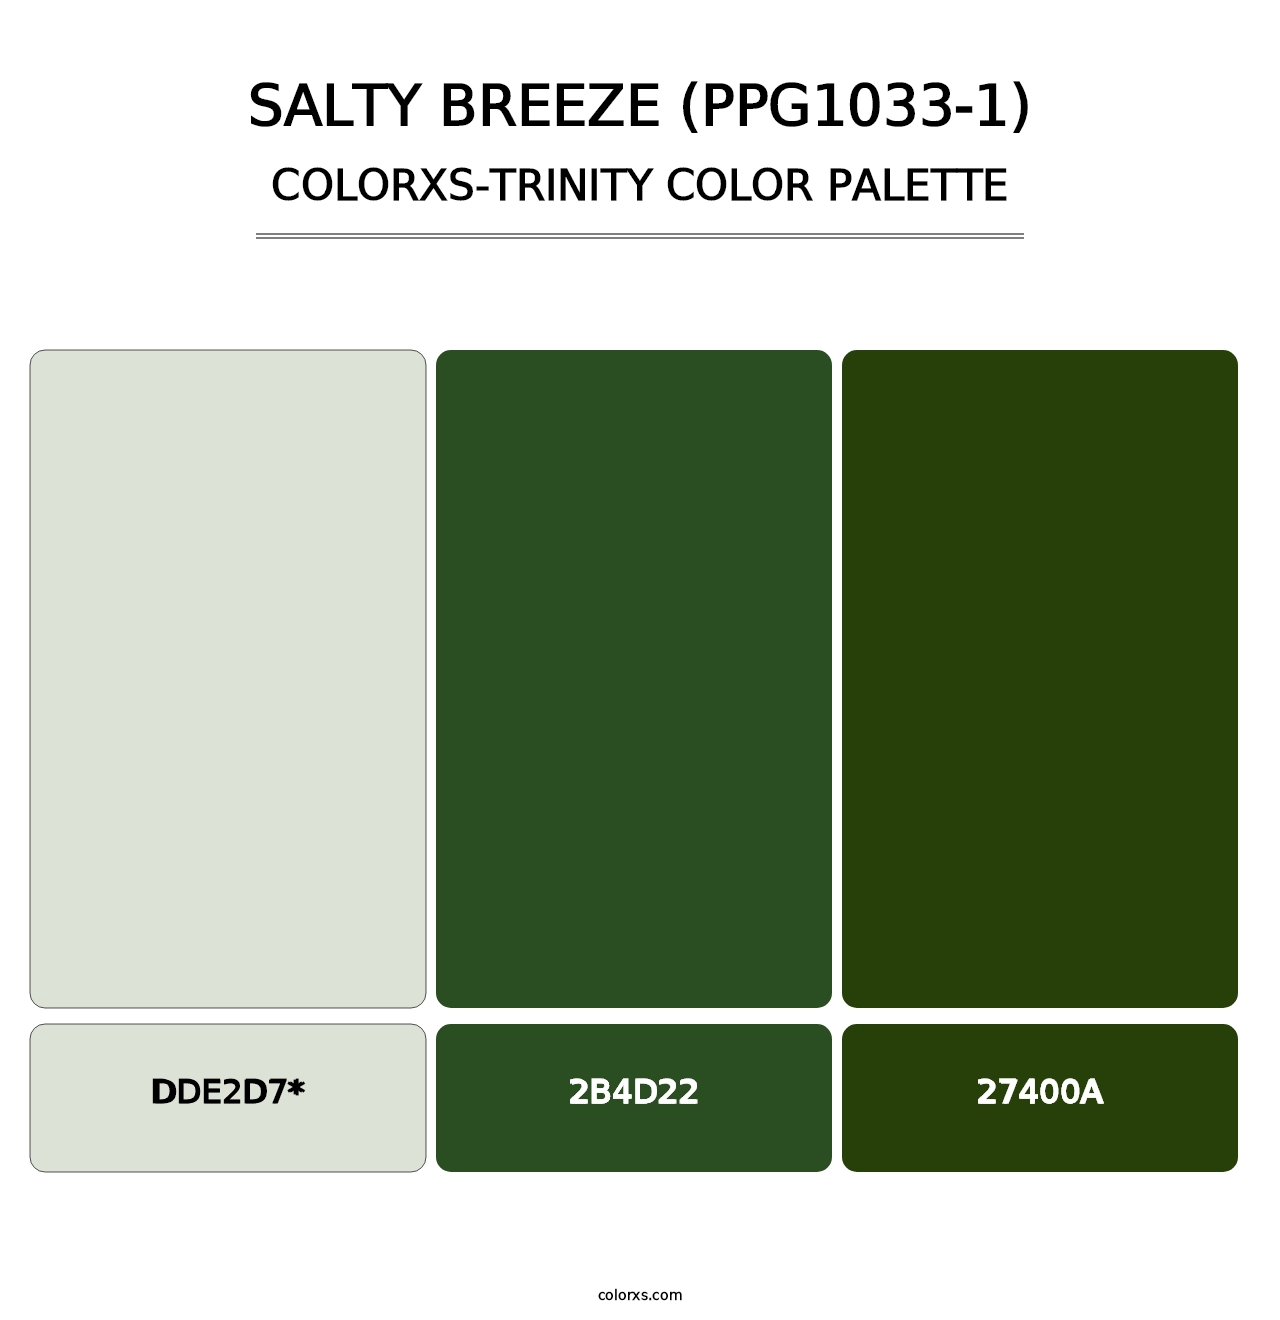 Salty Breeze (PPG1033-1) - Colorxs Trinity Palette